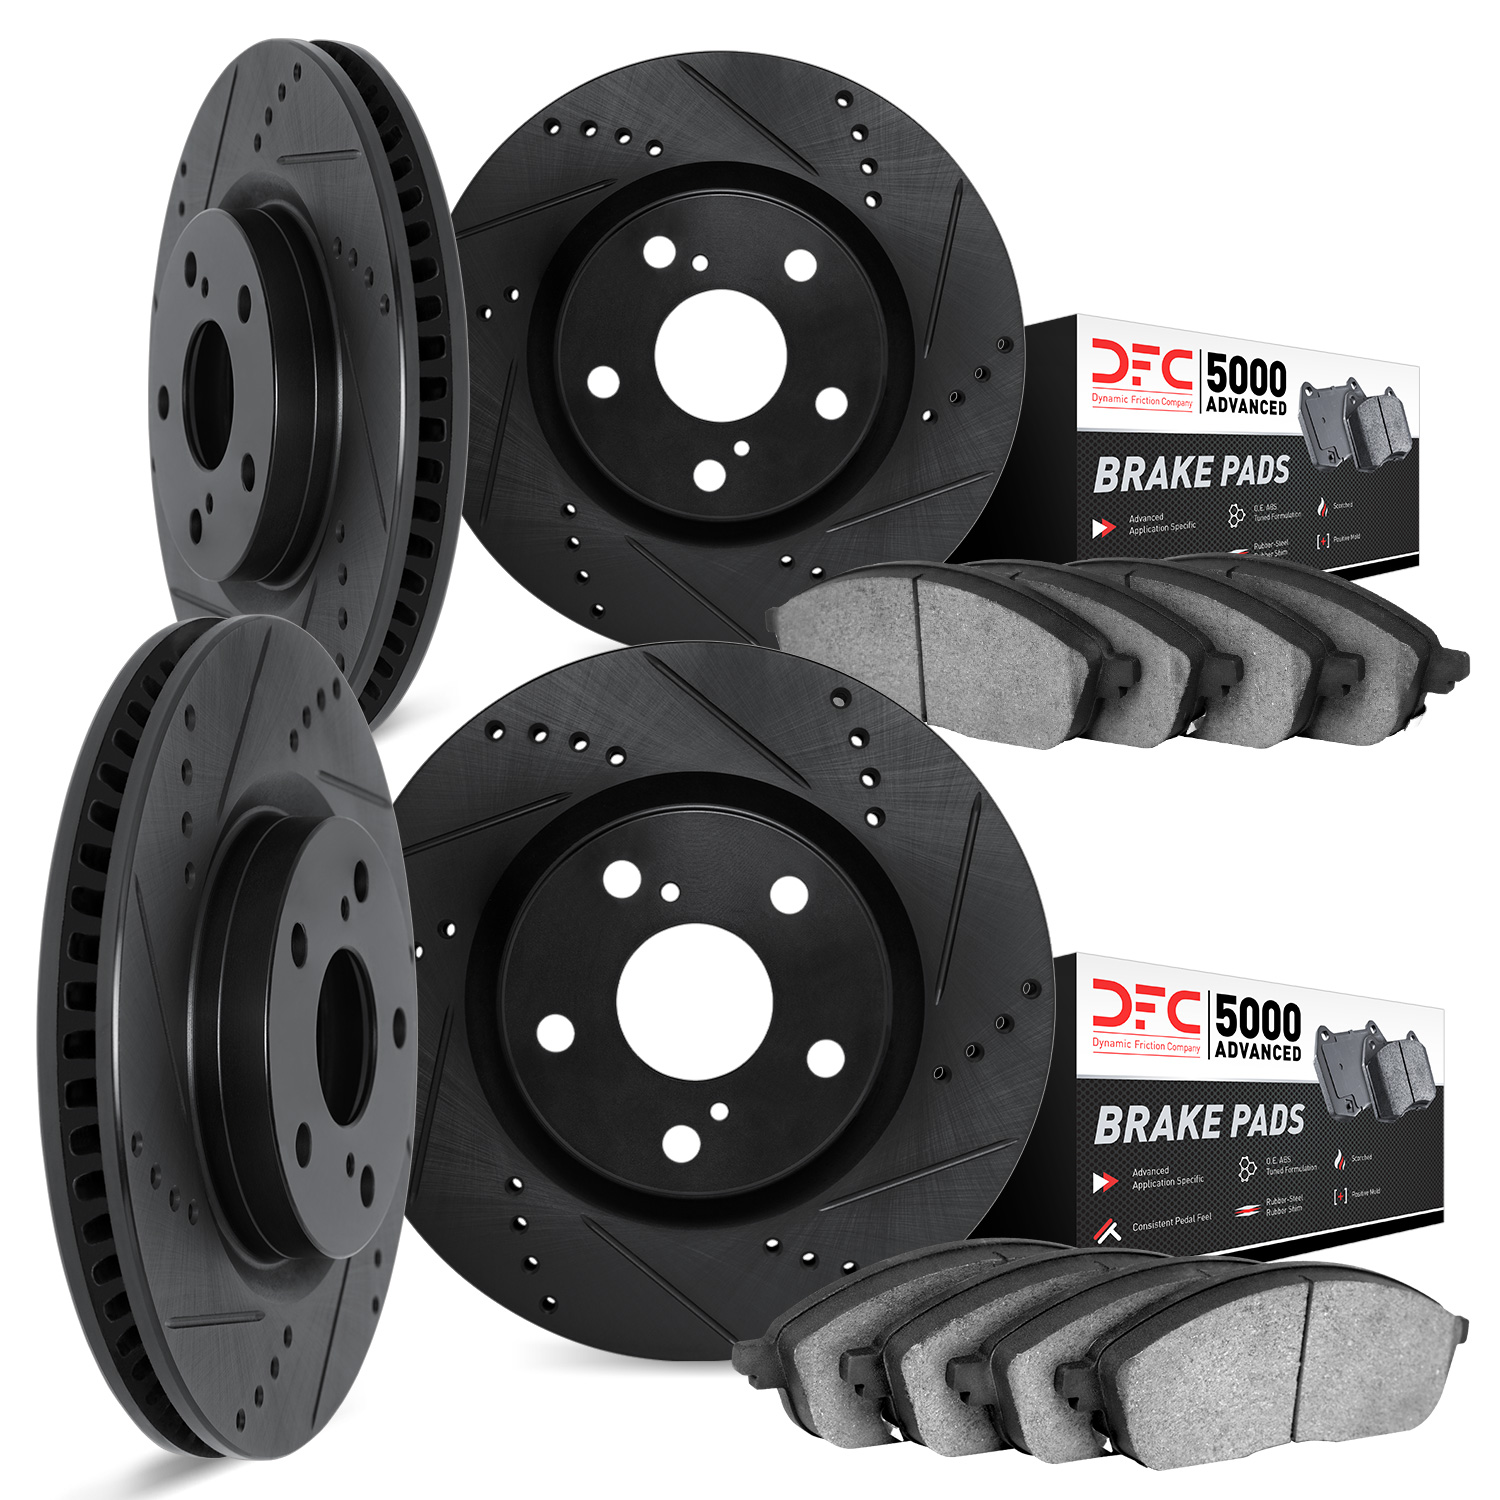 8504-48005 Drilled/Slotted Brake Rotors w/5000 Advanced Brake Pads Kit [Black], 1998-2005 GM, Position: Front and Rear